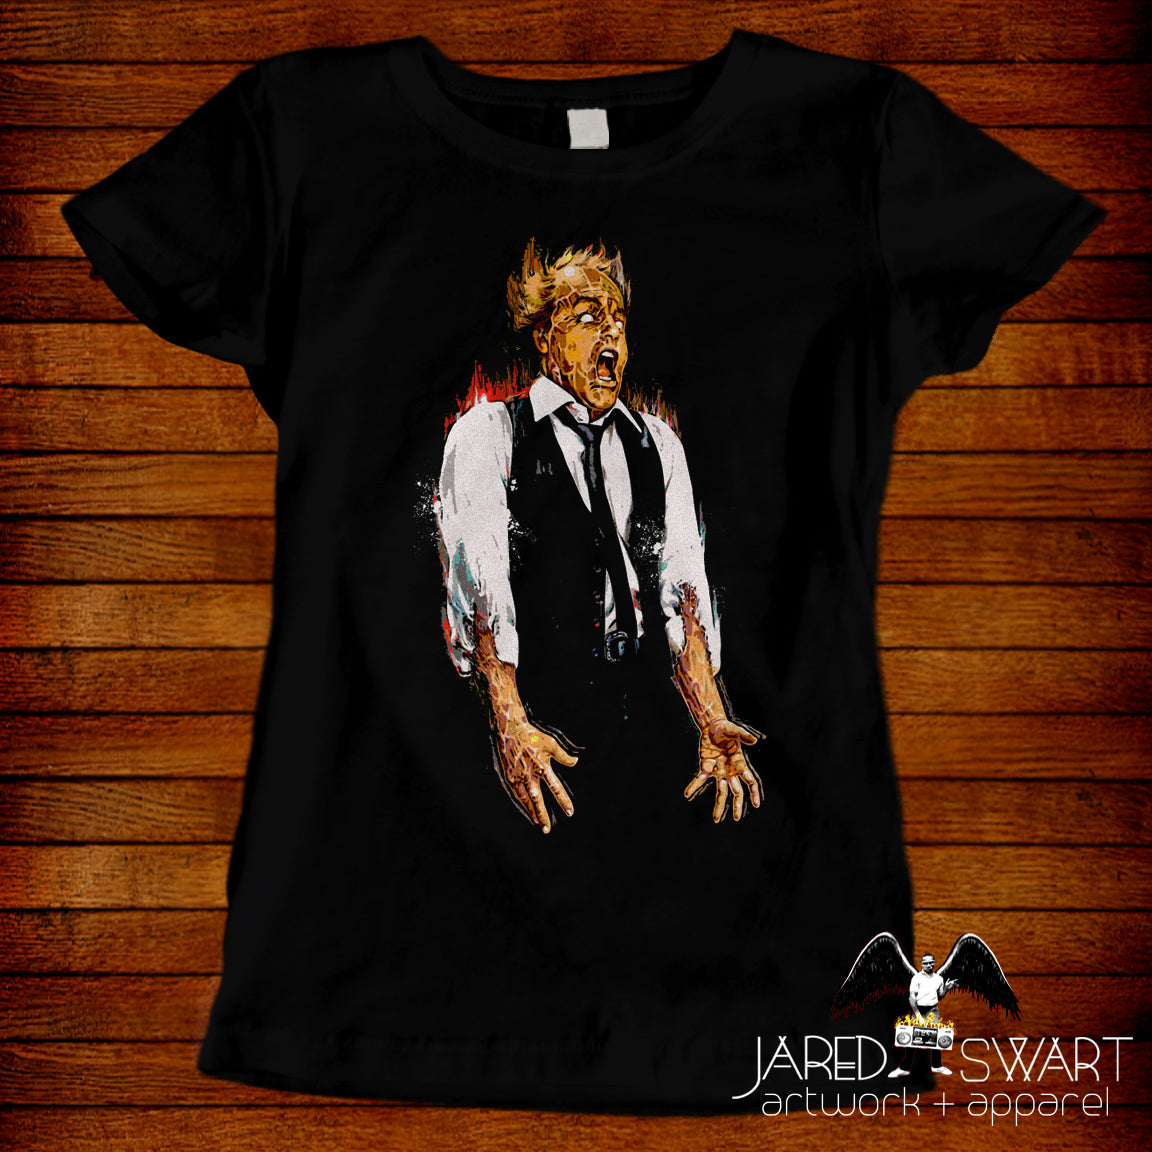 Scanners T-shirt based on the 1981 cult classic movie